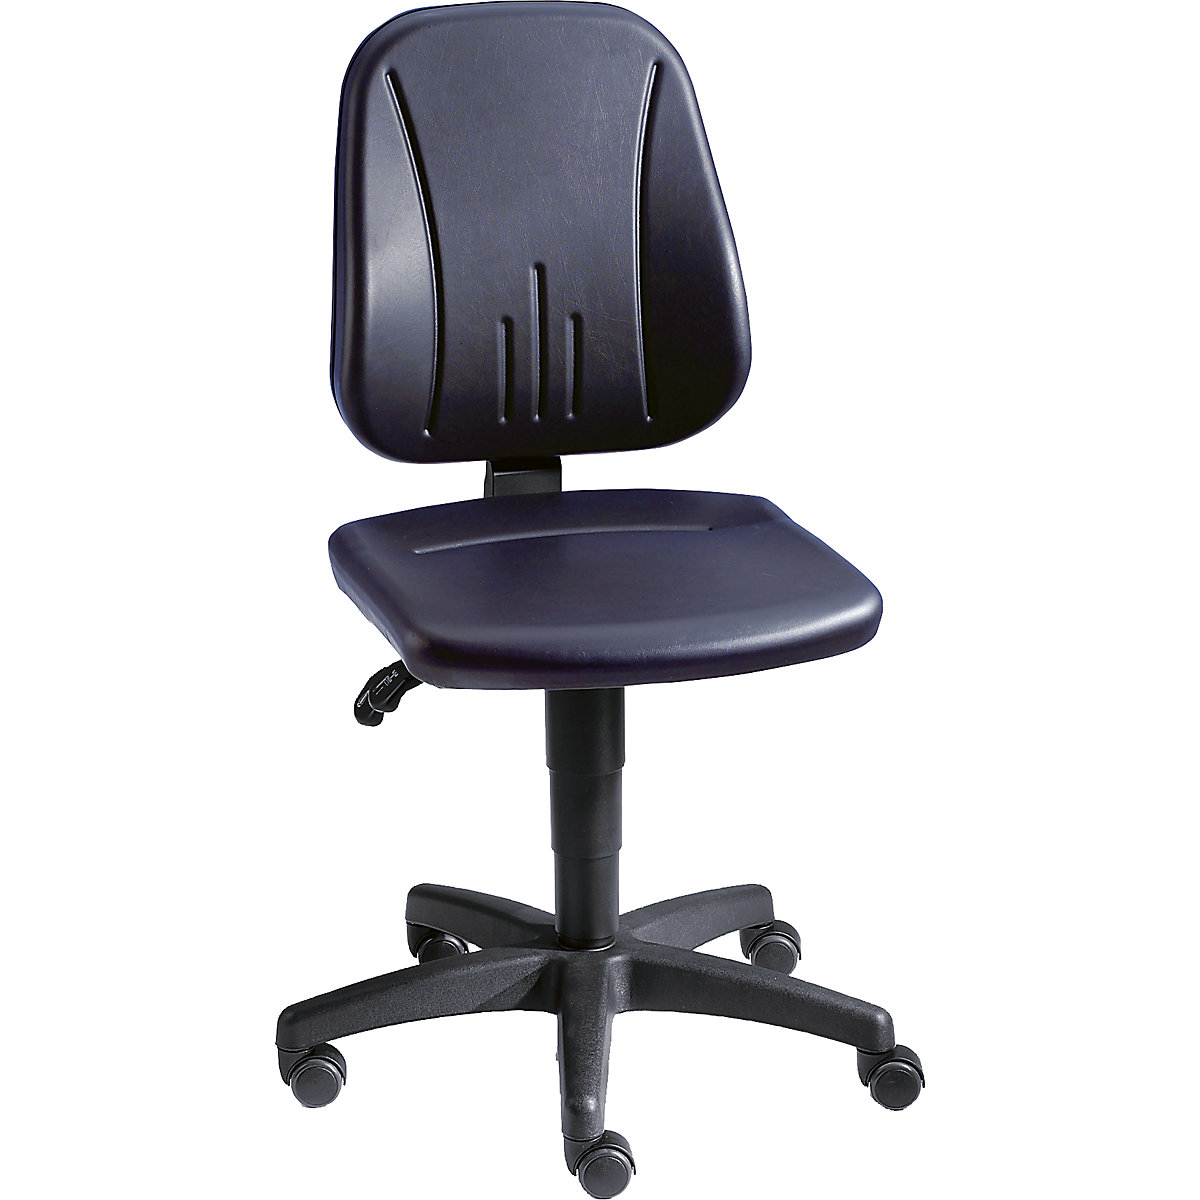 Industrial swivel chair – bimos, with gas lift height adjustment, vinyl cover, black, with castors-8